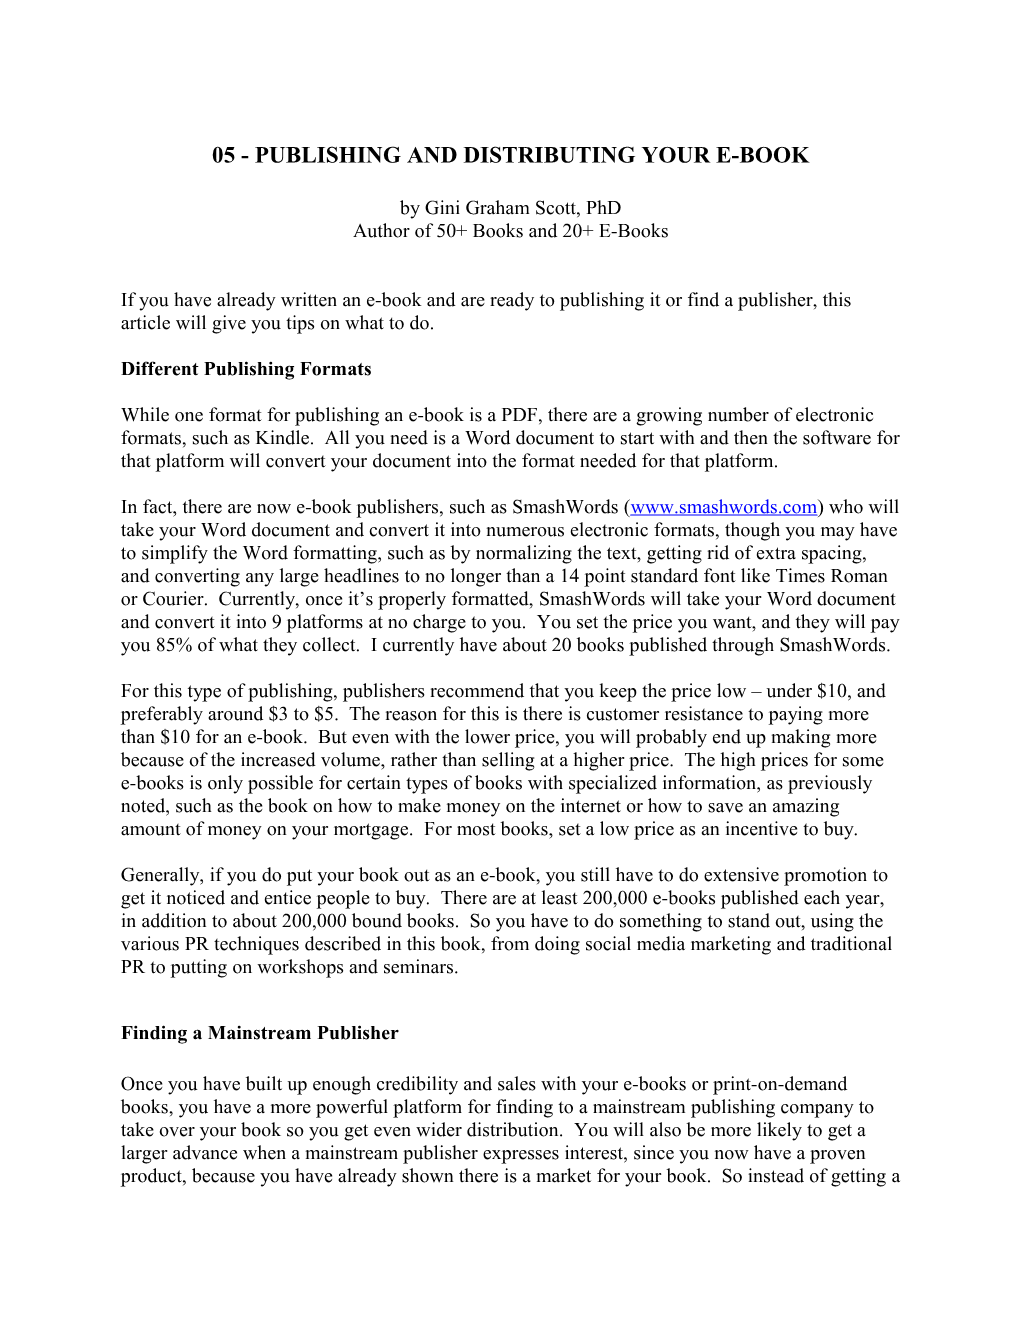 Publishing and Distributing Your E-Book